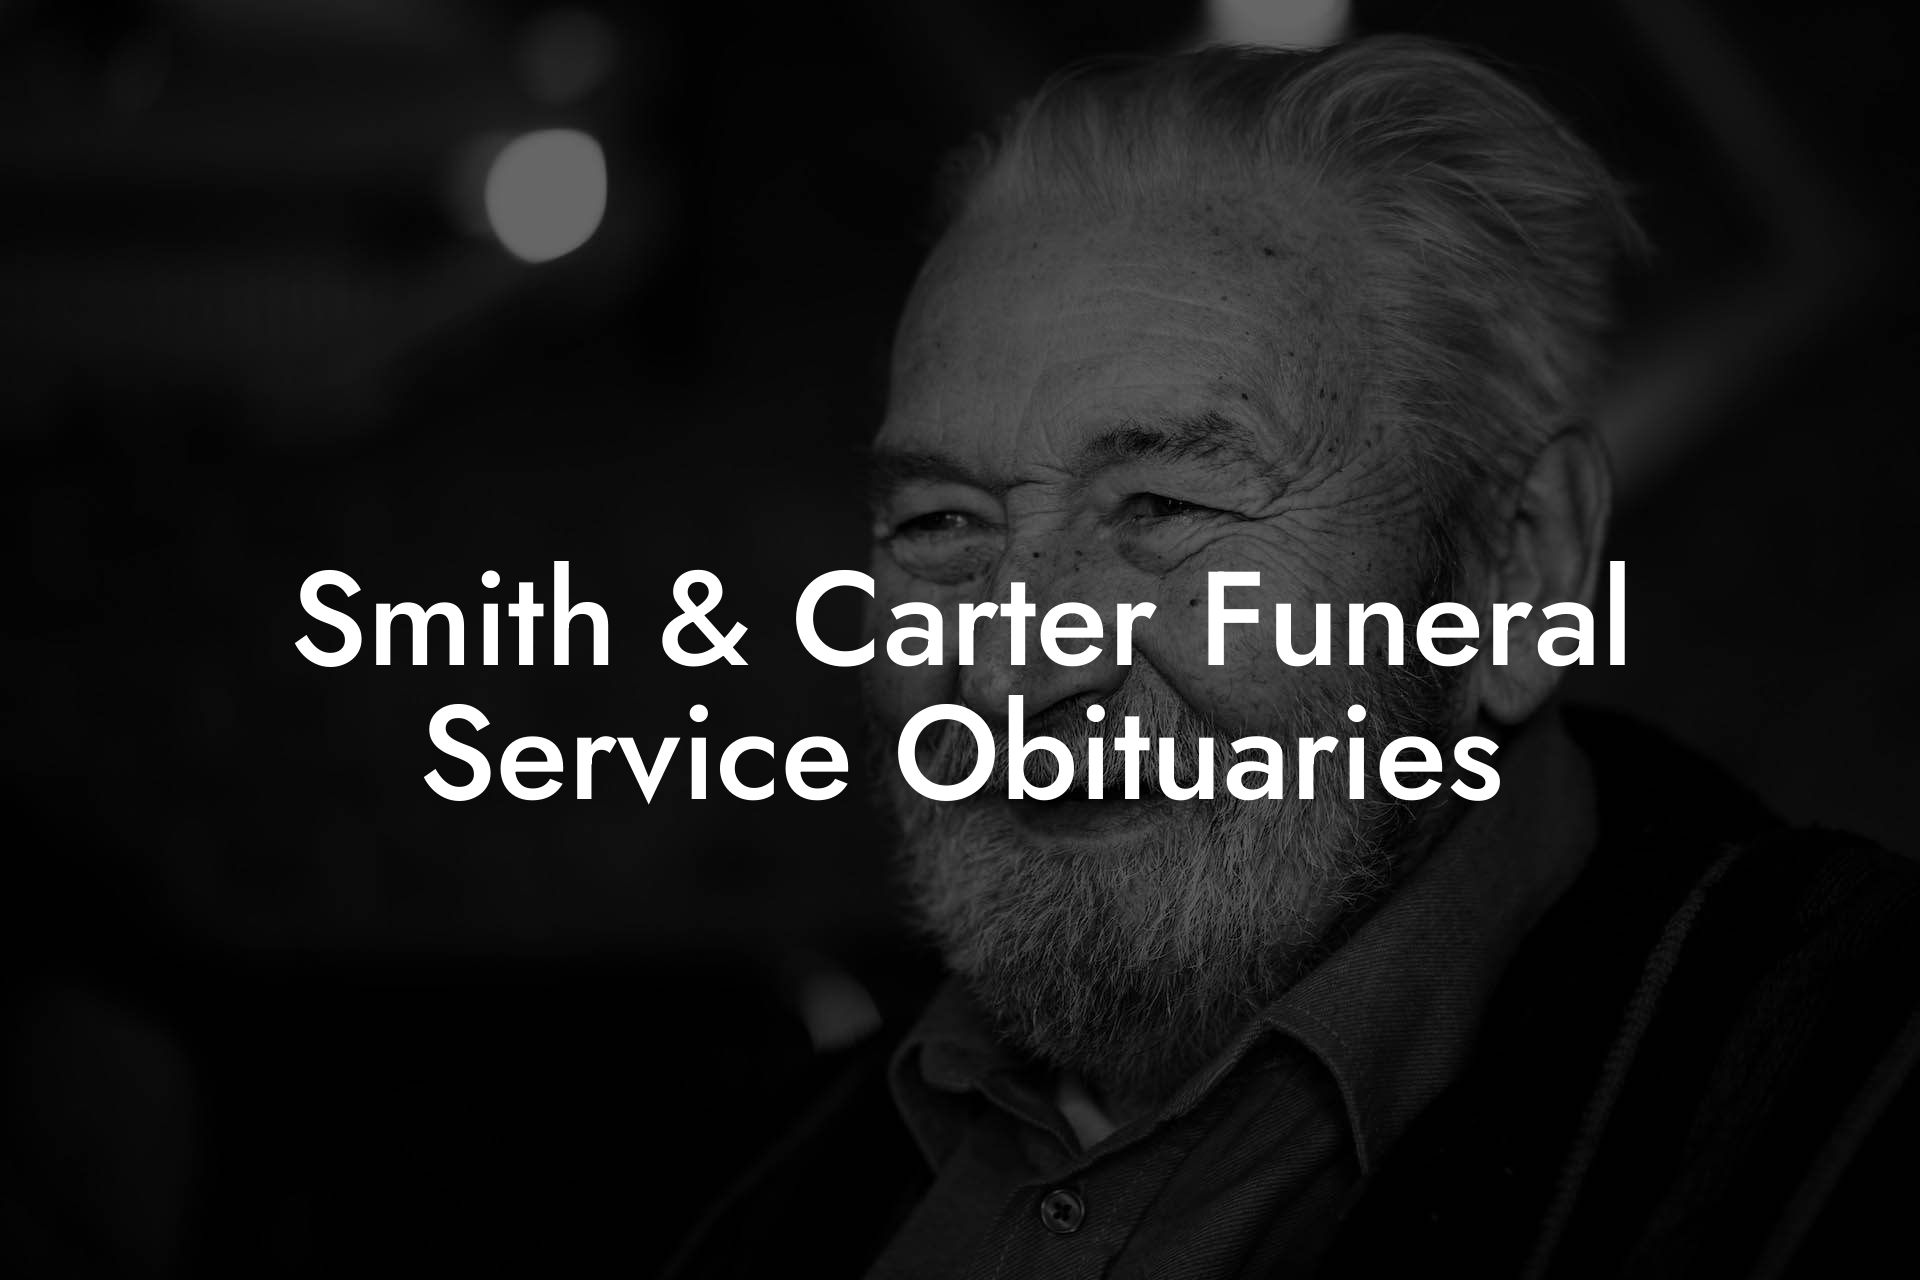 Smith & Carter Funeral Service Obituaries